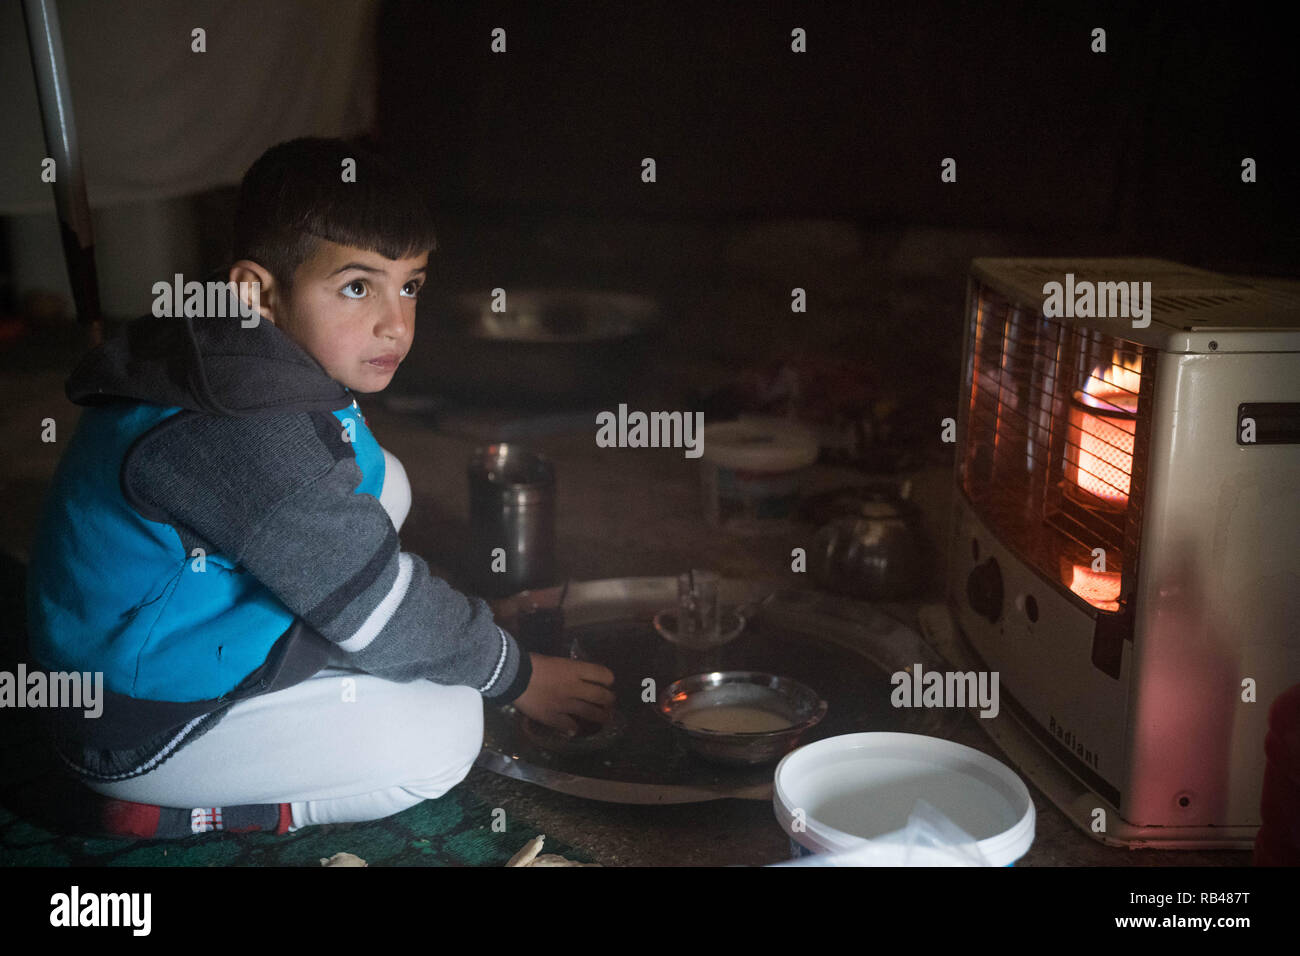 Zakho, Duhok Governorate, Iraq. 29th Dec, 2018. A Yazidi child sitting in front of a heater in a cold winter morning.The Bajed Kandala IDP camp is hosting over 9000 Yazidi Internally Displaced Persons from Sinjar where they lost their homes to the ISIS militants in August 2014. Credit: Geovien So/SOPA Images/ZUMA Wire/Alamy Live News Stock Photo